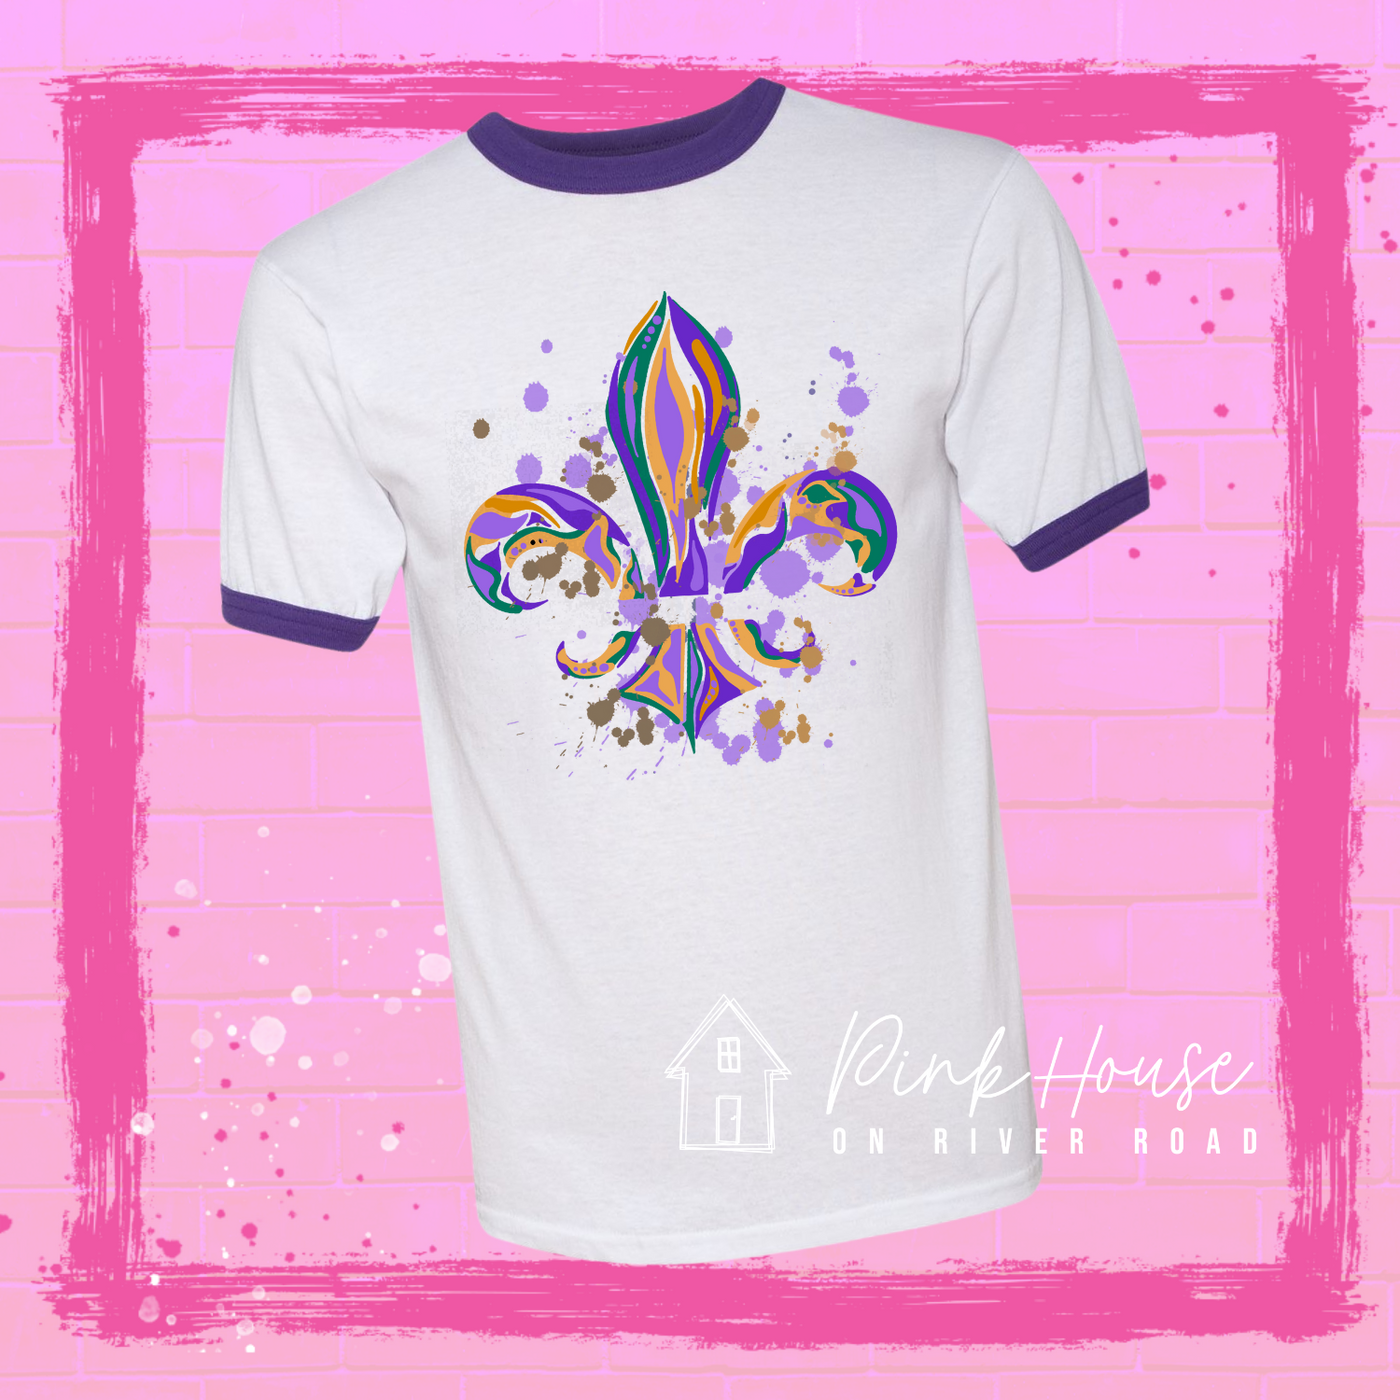 White and purple ringer tee with a Fleur de Lis made up of layered green, yellow, and purple with green, yellow and purple colored splatters.